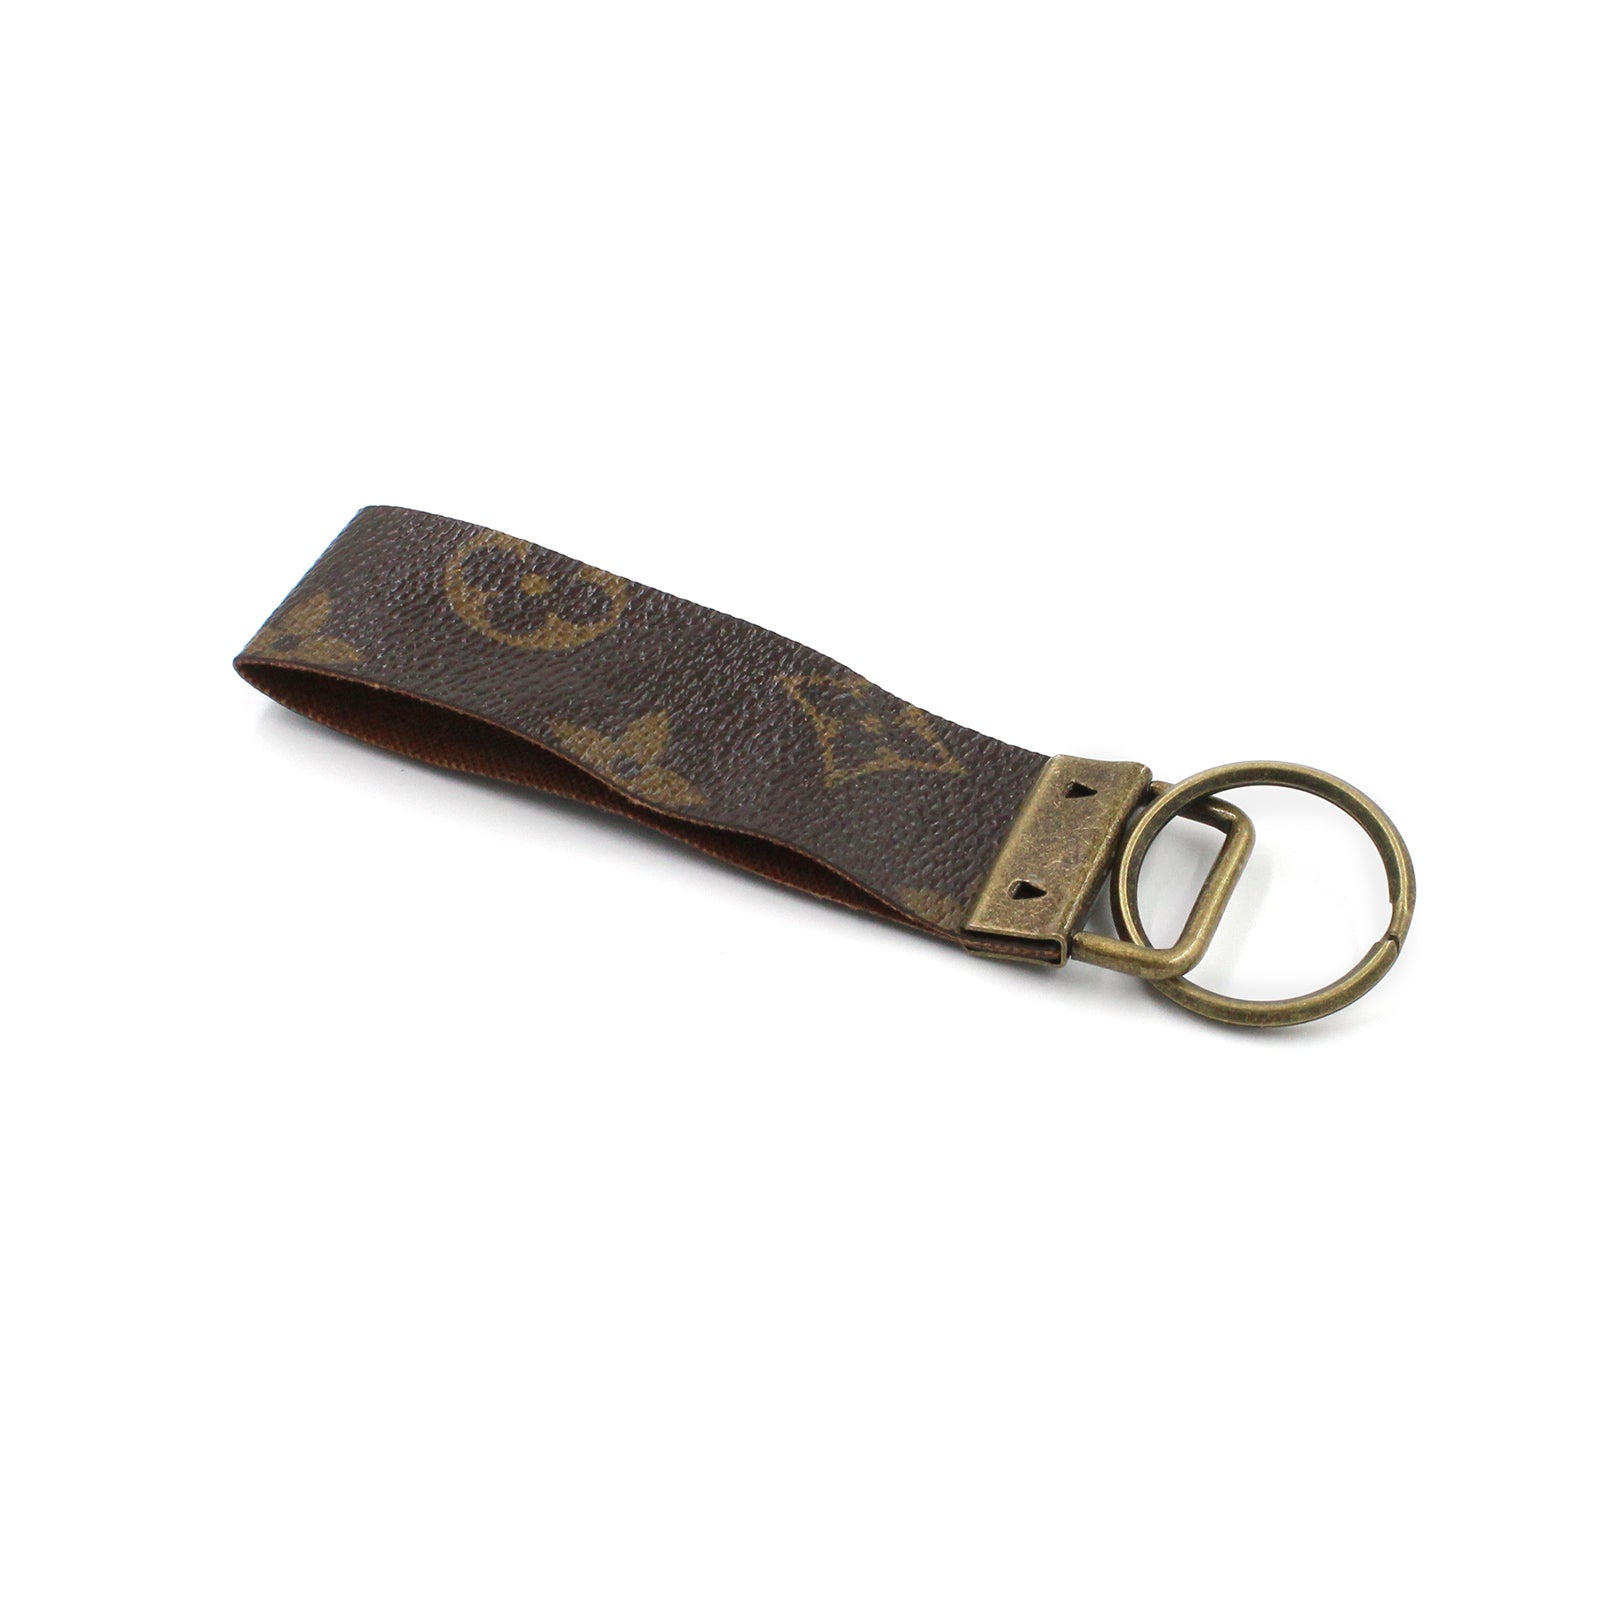 Repurposed Louis Vuitton Leather Key Chain 3 – N.Kluger Designs